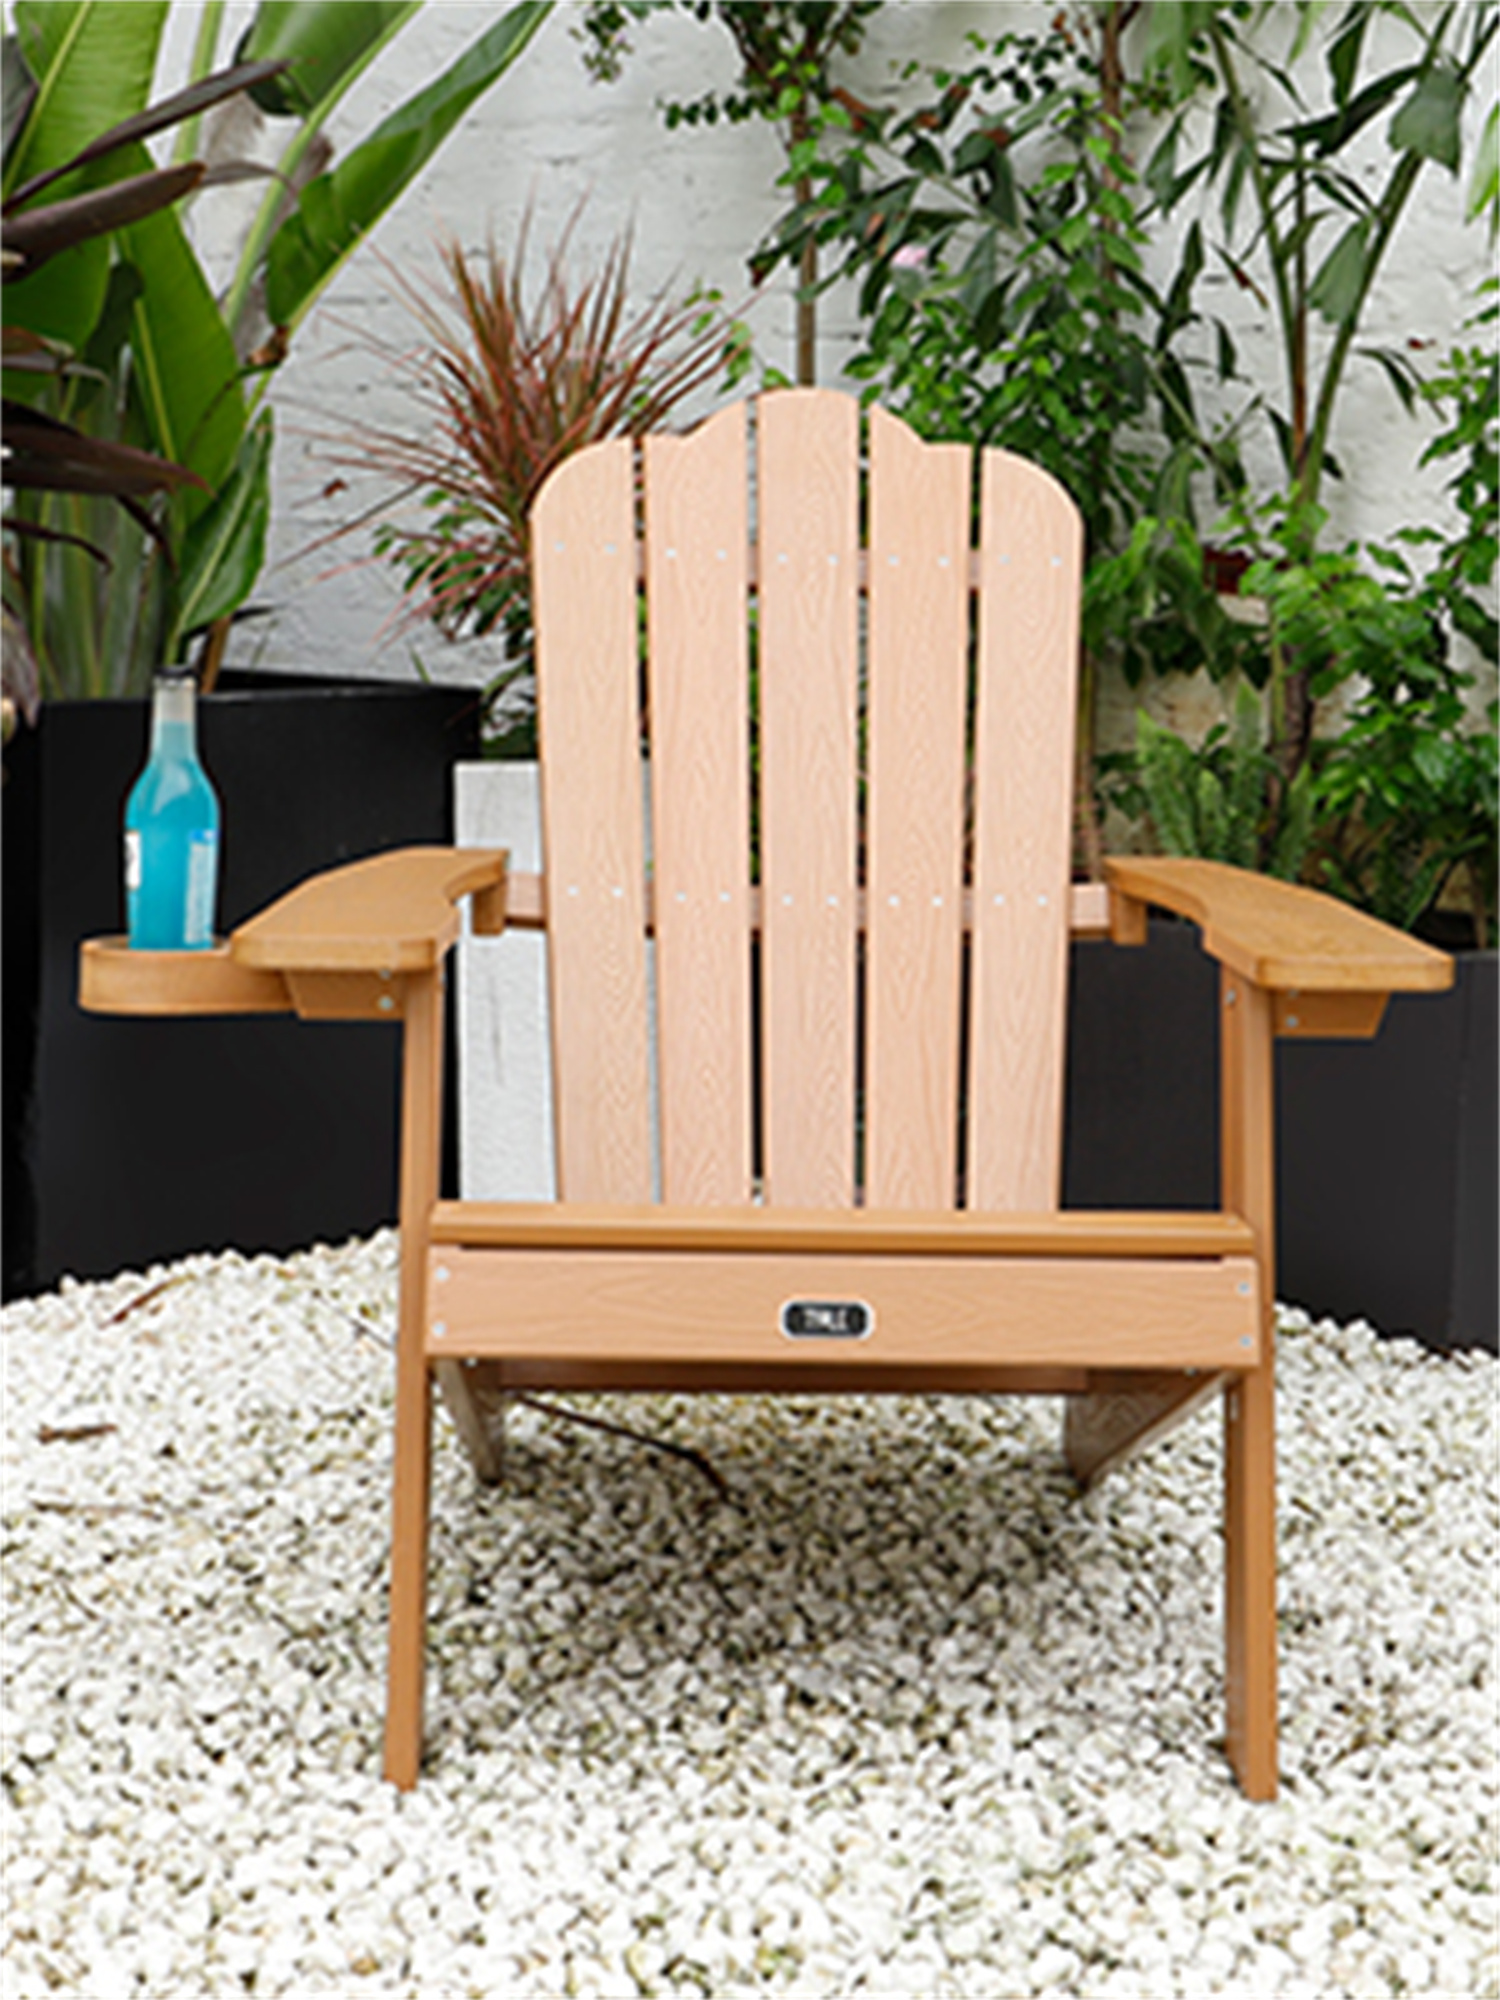 Oversized Folding Adirondack Chair with Cup Holder, Fade-Resistant Lounge Chair, 380lbs Capacity, All-Weather Chair for Lawn Outdoor Patio Deck Garden Porch Lawn, Brown - image 1 of 7